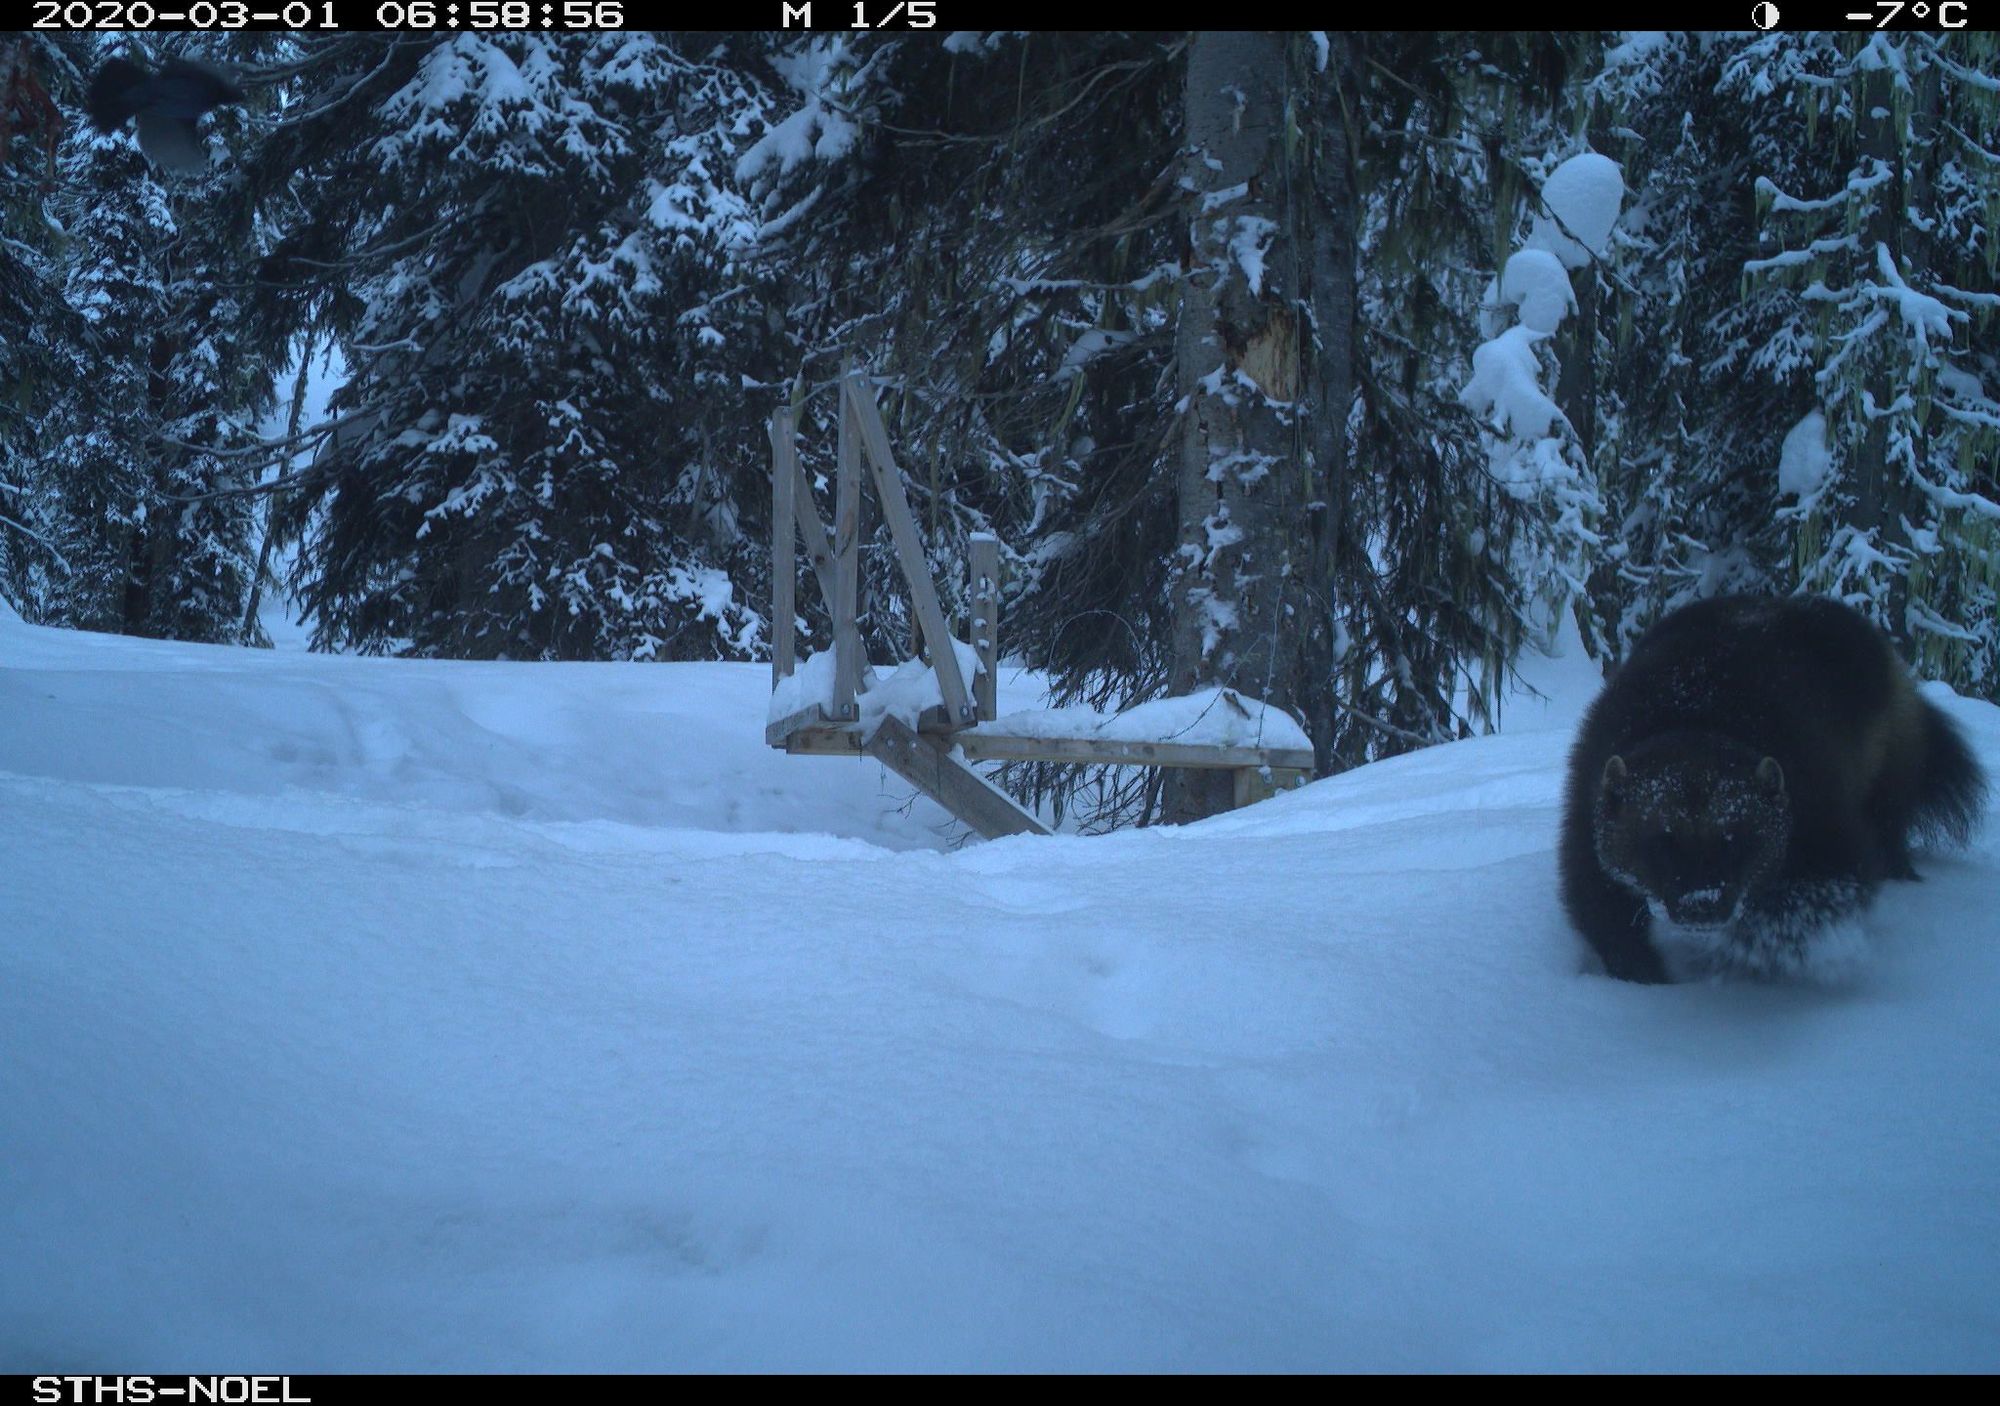 A camera trap photo of a wolverine in the snow, with forest in the background